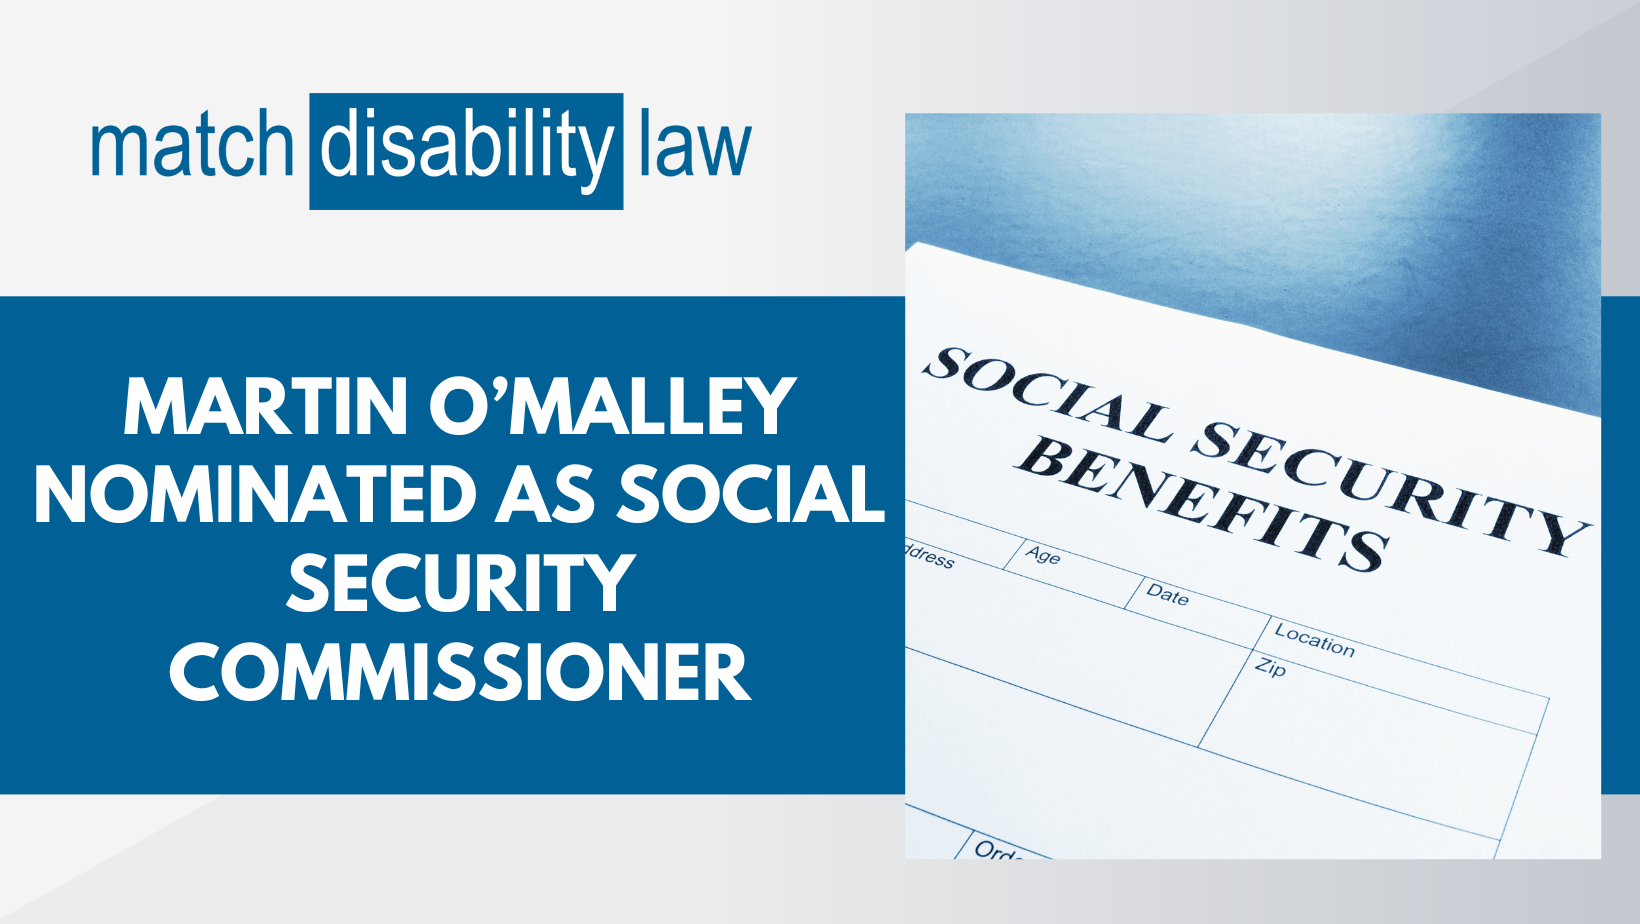 Martin O'Malley nominated as social security commissioner image, Marva Match Disability Security Law Social Security Disability Attorneys, Utah Social Security Law, disability benefits, get assistance, help and benefits, free help, ssdi, benefits, disability security